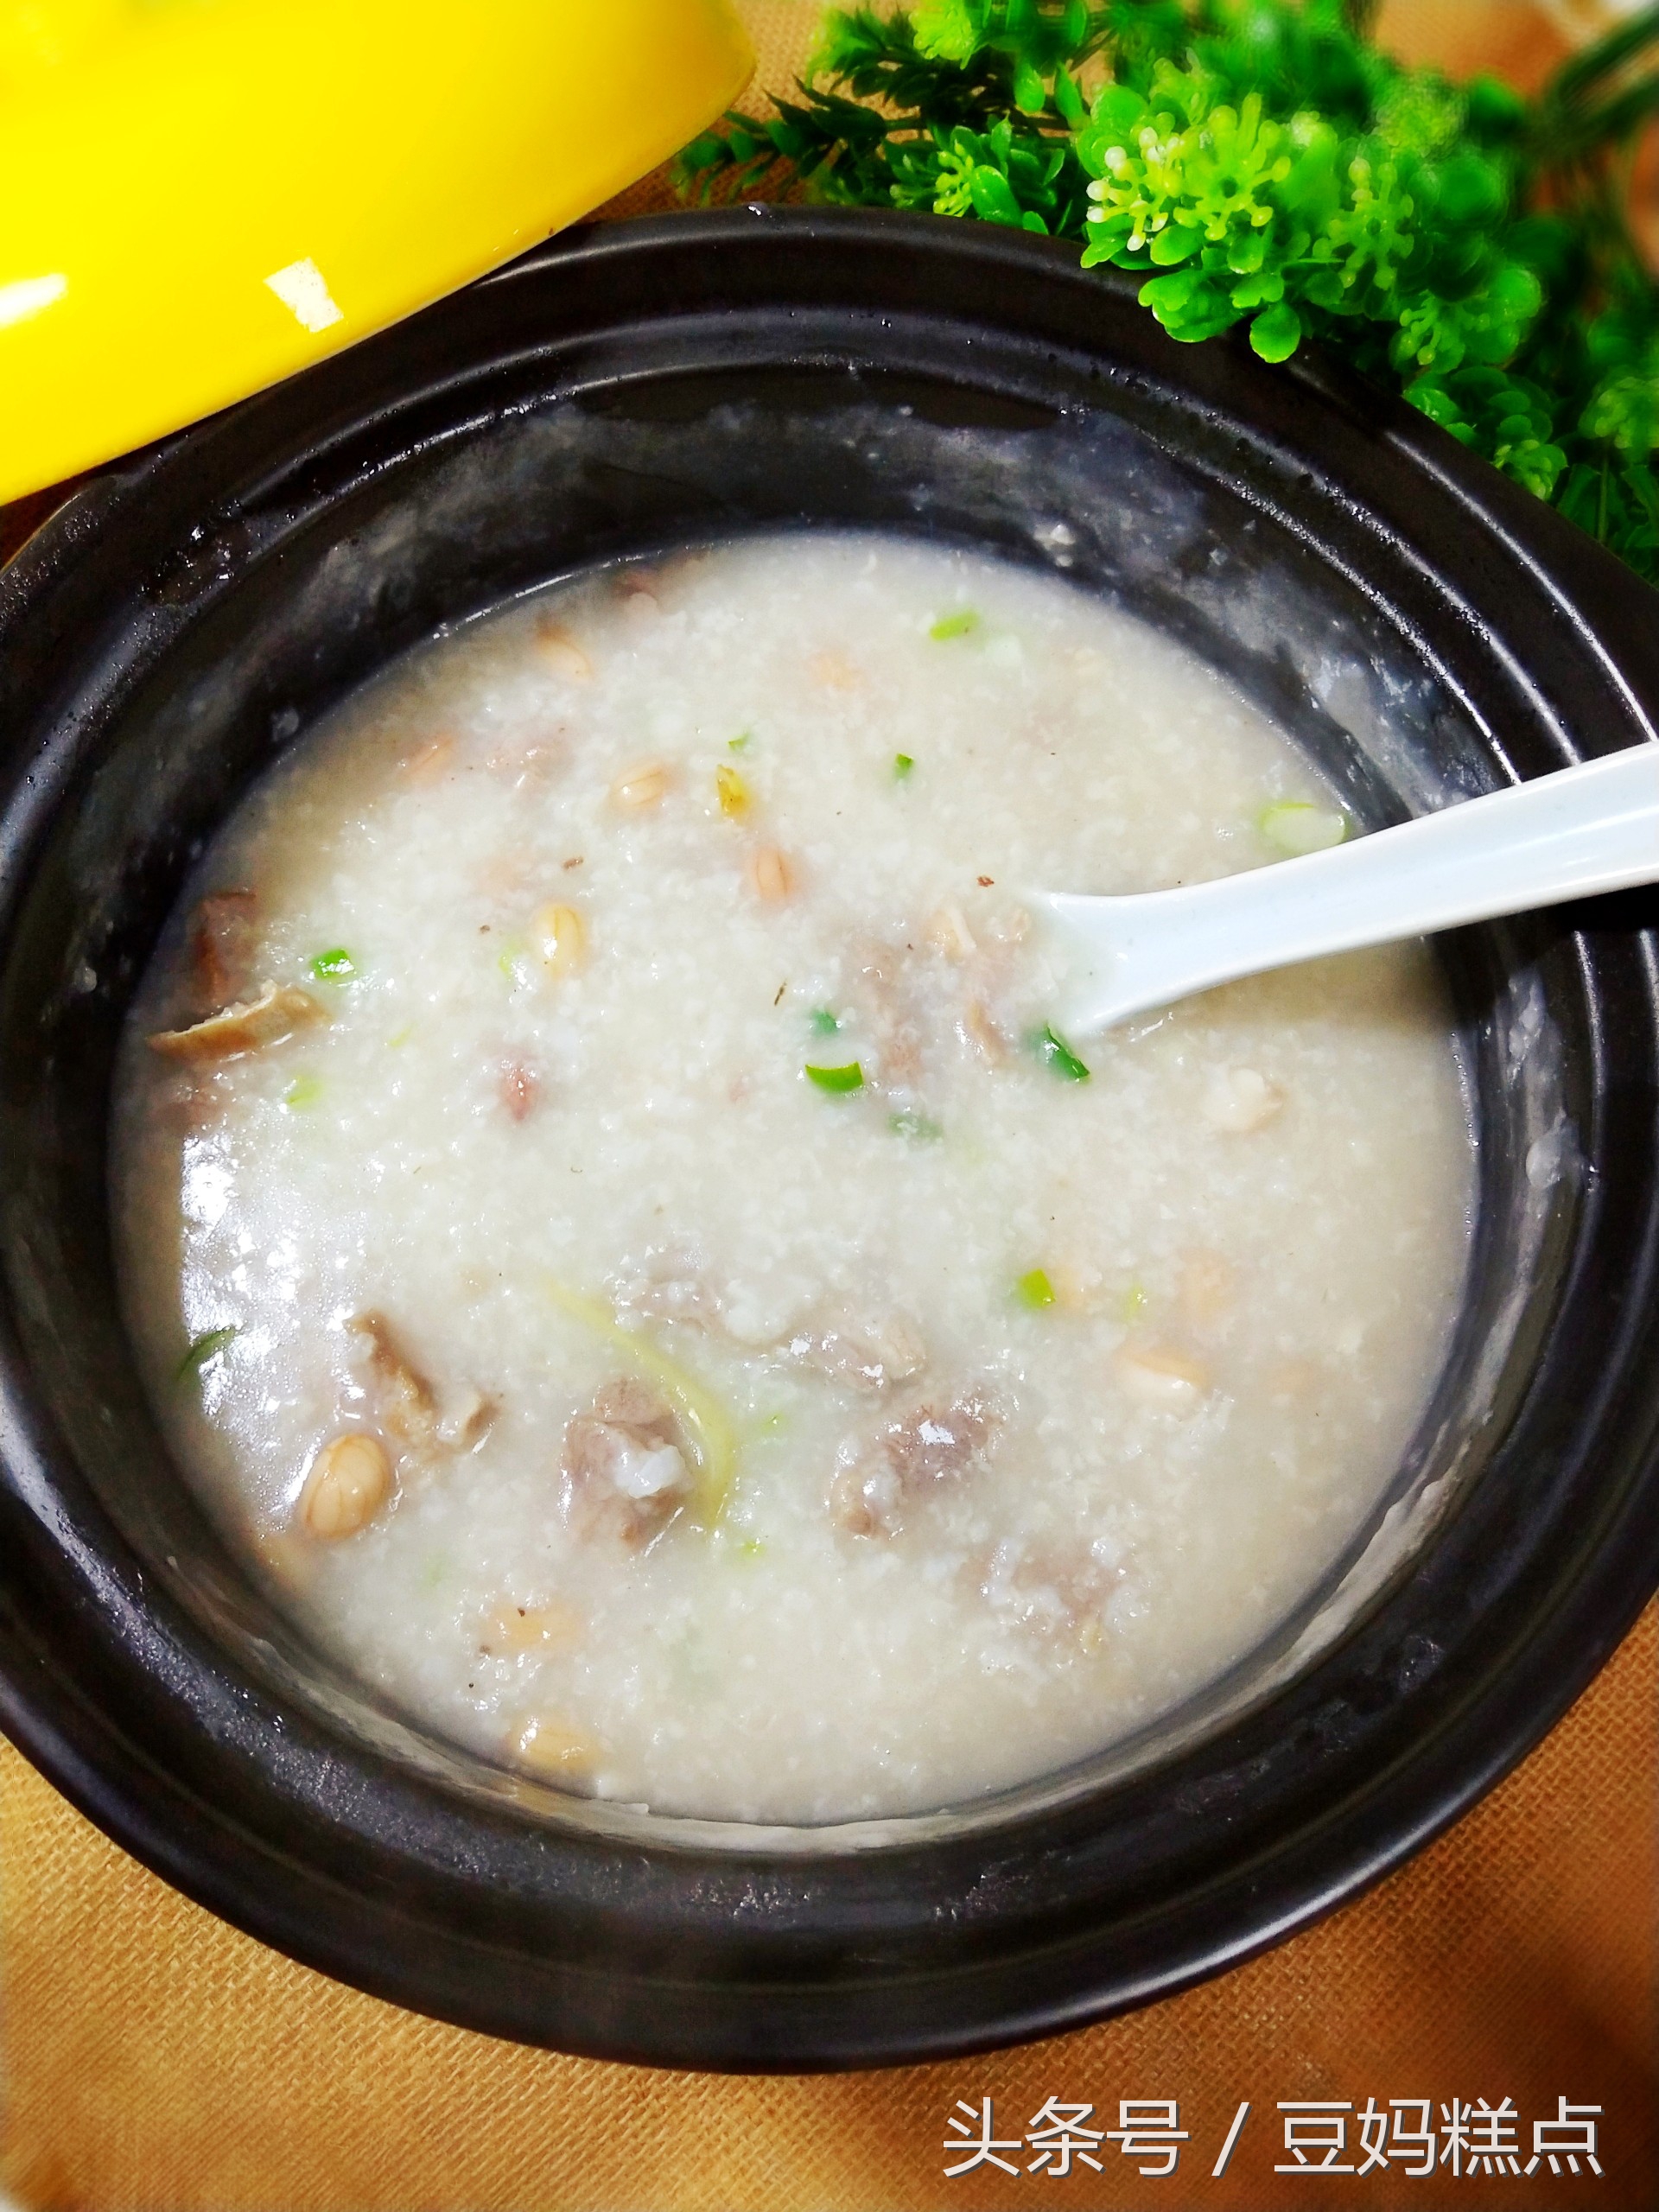 A taste of memories -- Echo's Kitchen: 【咸排骨花生粥】Salted Ribs and Peanut ...